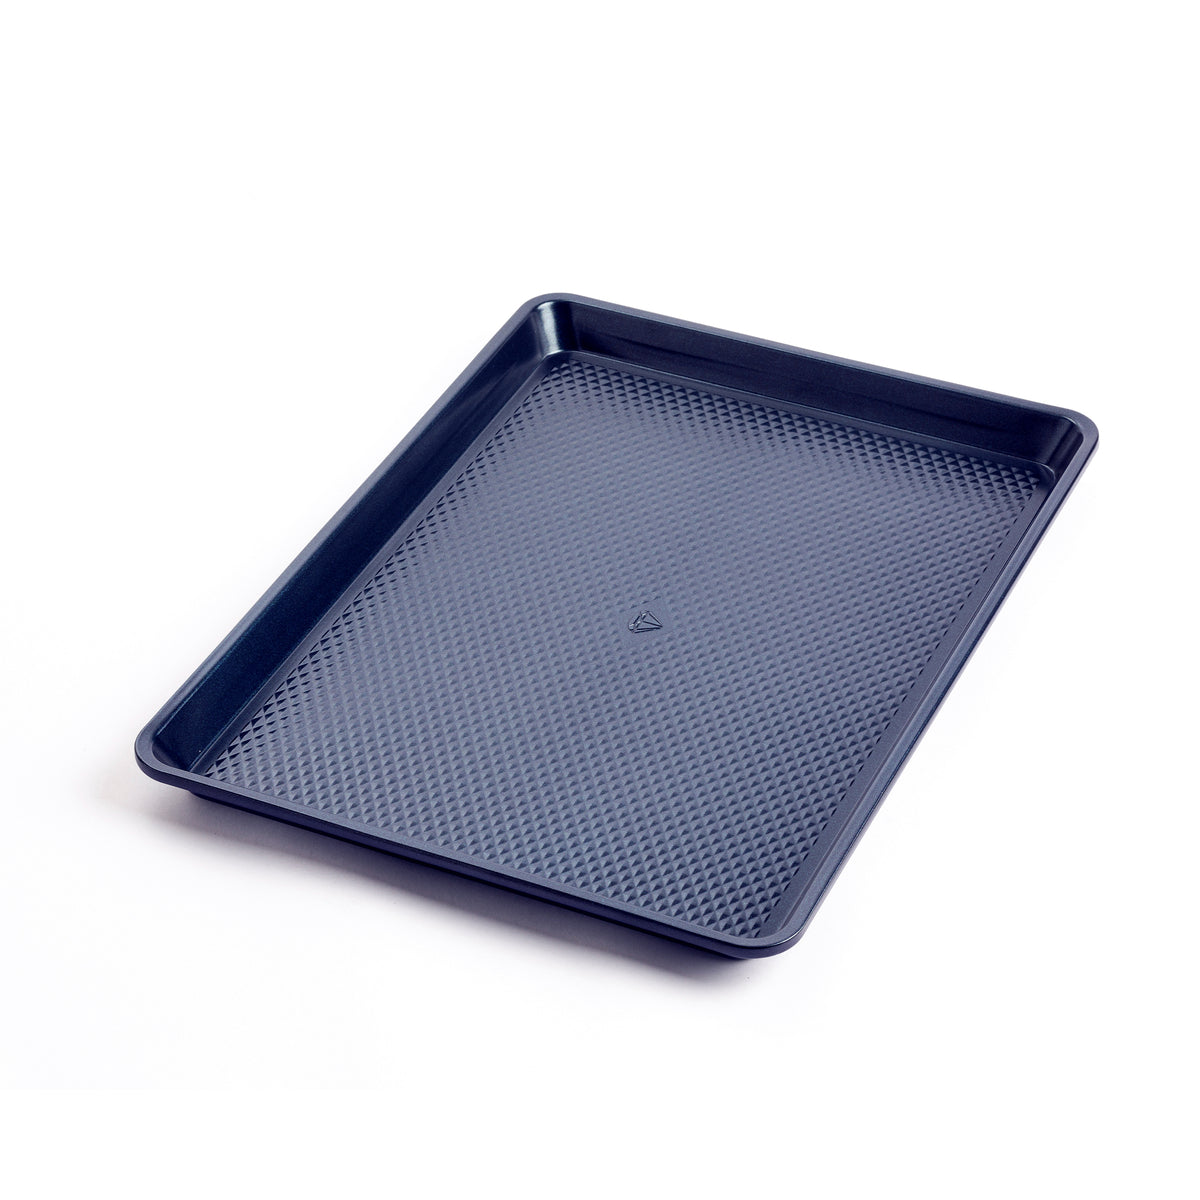 Nonstick Large Cookie Sheet 18 x 13 , Aluminized Steel Large Size